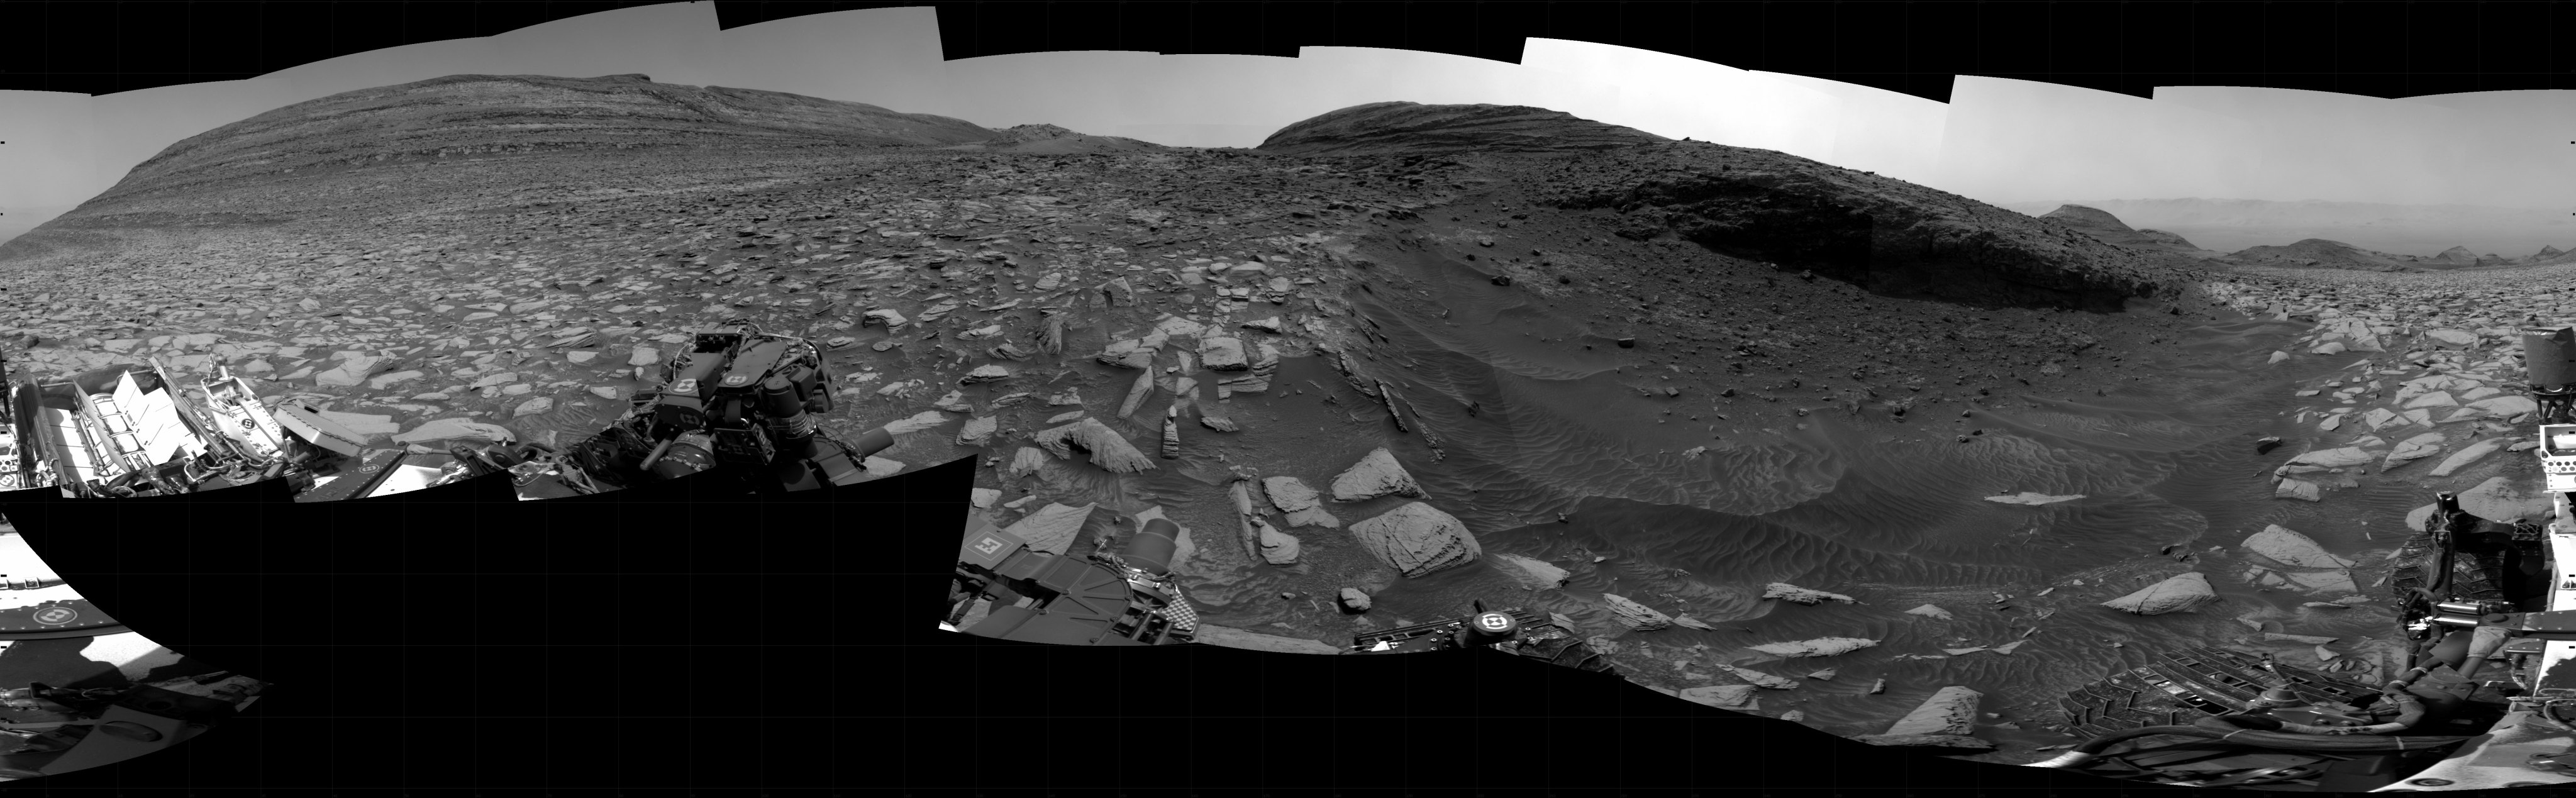 Curiosity took the images on May 06, 2024, Sol 4176 of the Mars Science Laboratory mission at drive 384, site number 107. The local mean solar time for the image exposures was 1 PM.